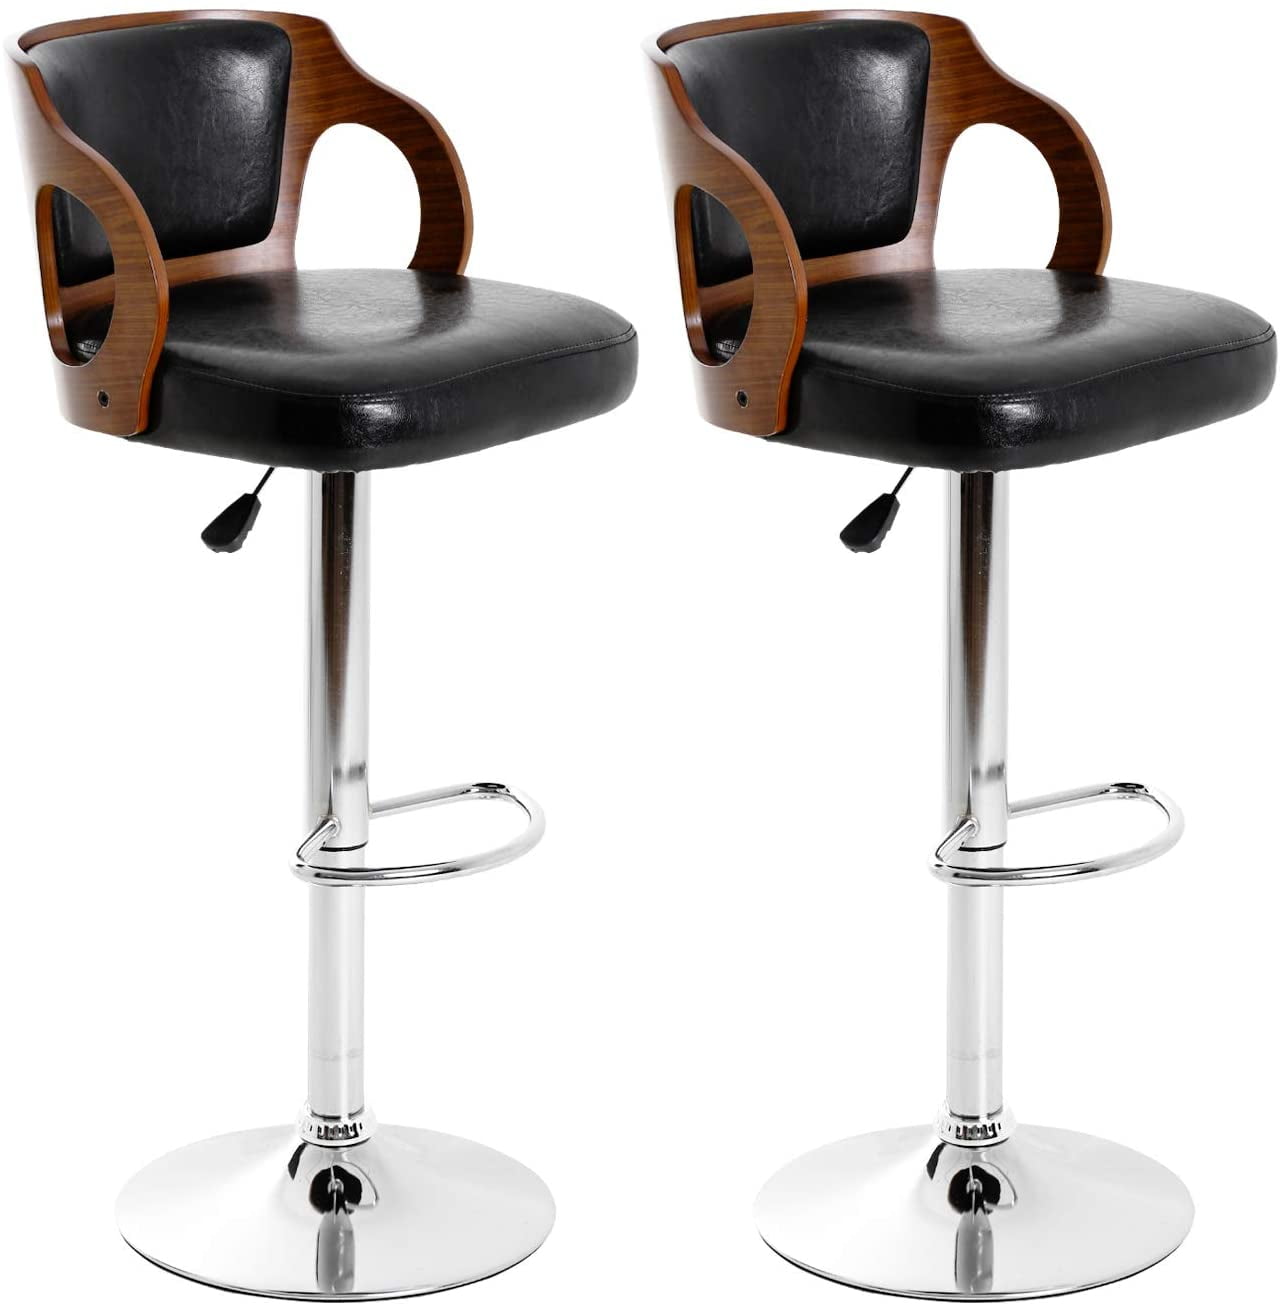 Adjustable Modern Swivel Bar Stools Dining Chair Counter Height Leather Set of 2 